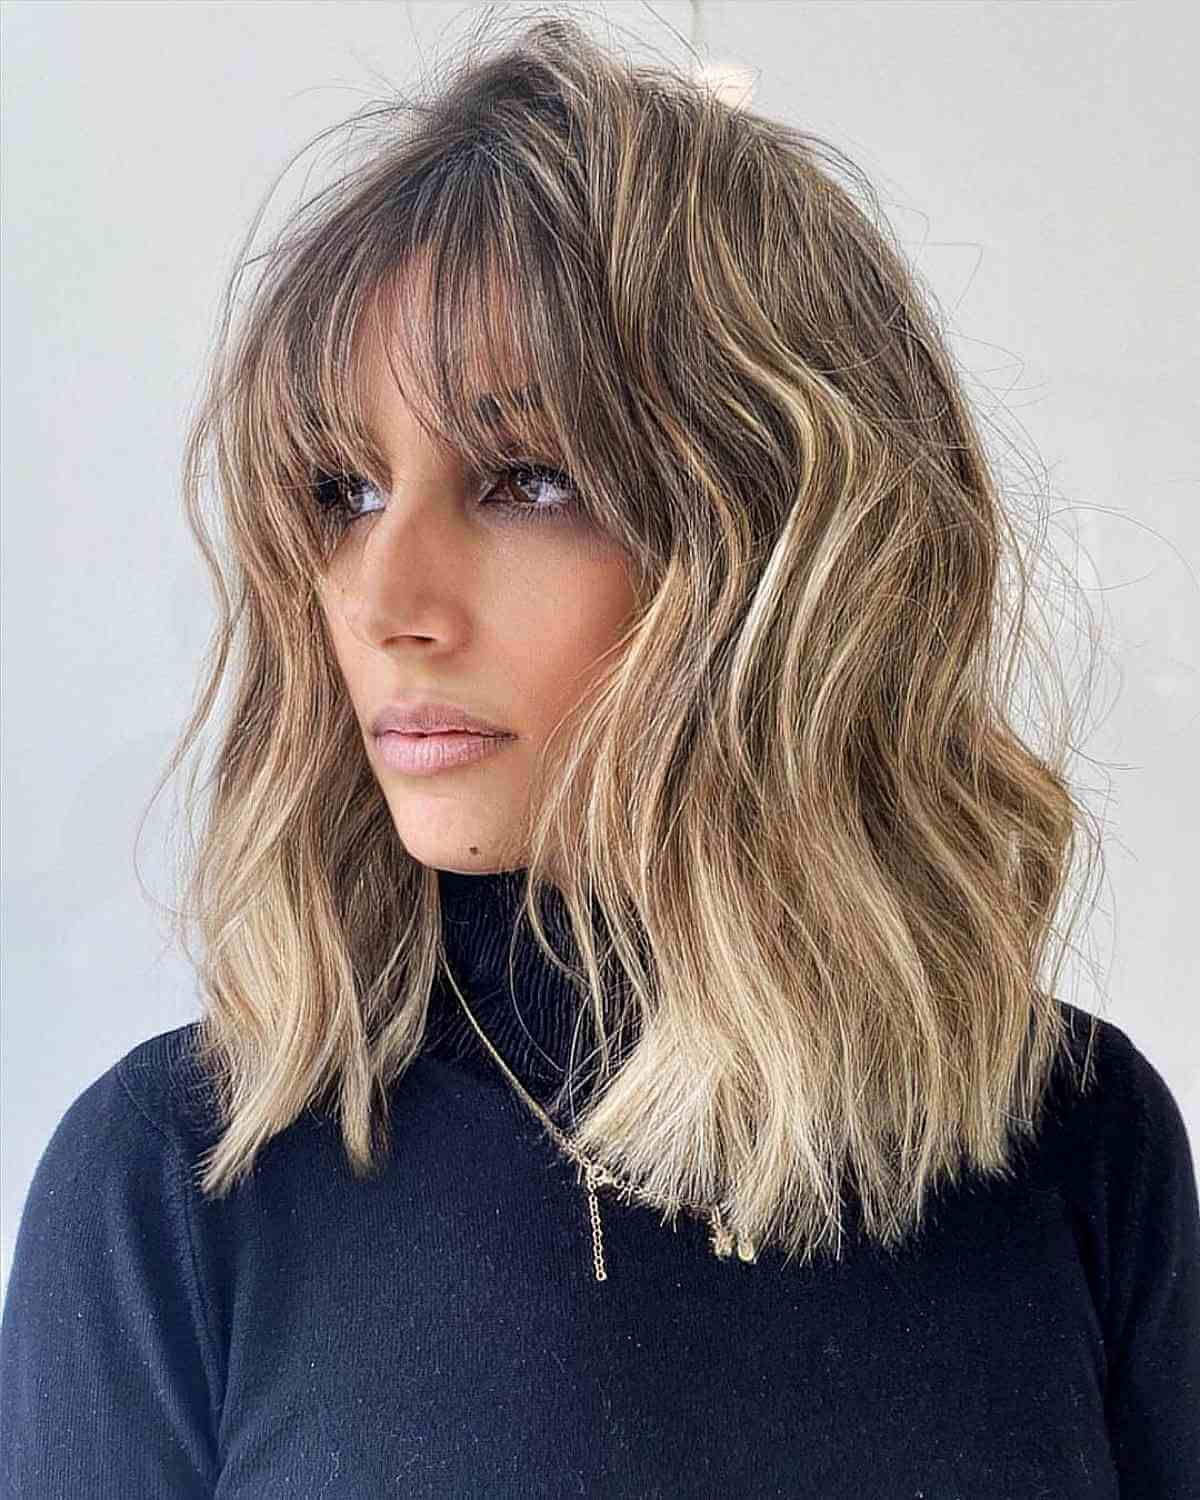 8 Famous Front-cut Hairstyles That Will Make You Look Younger